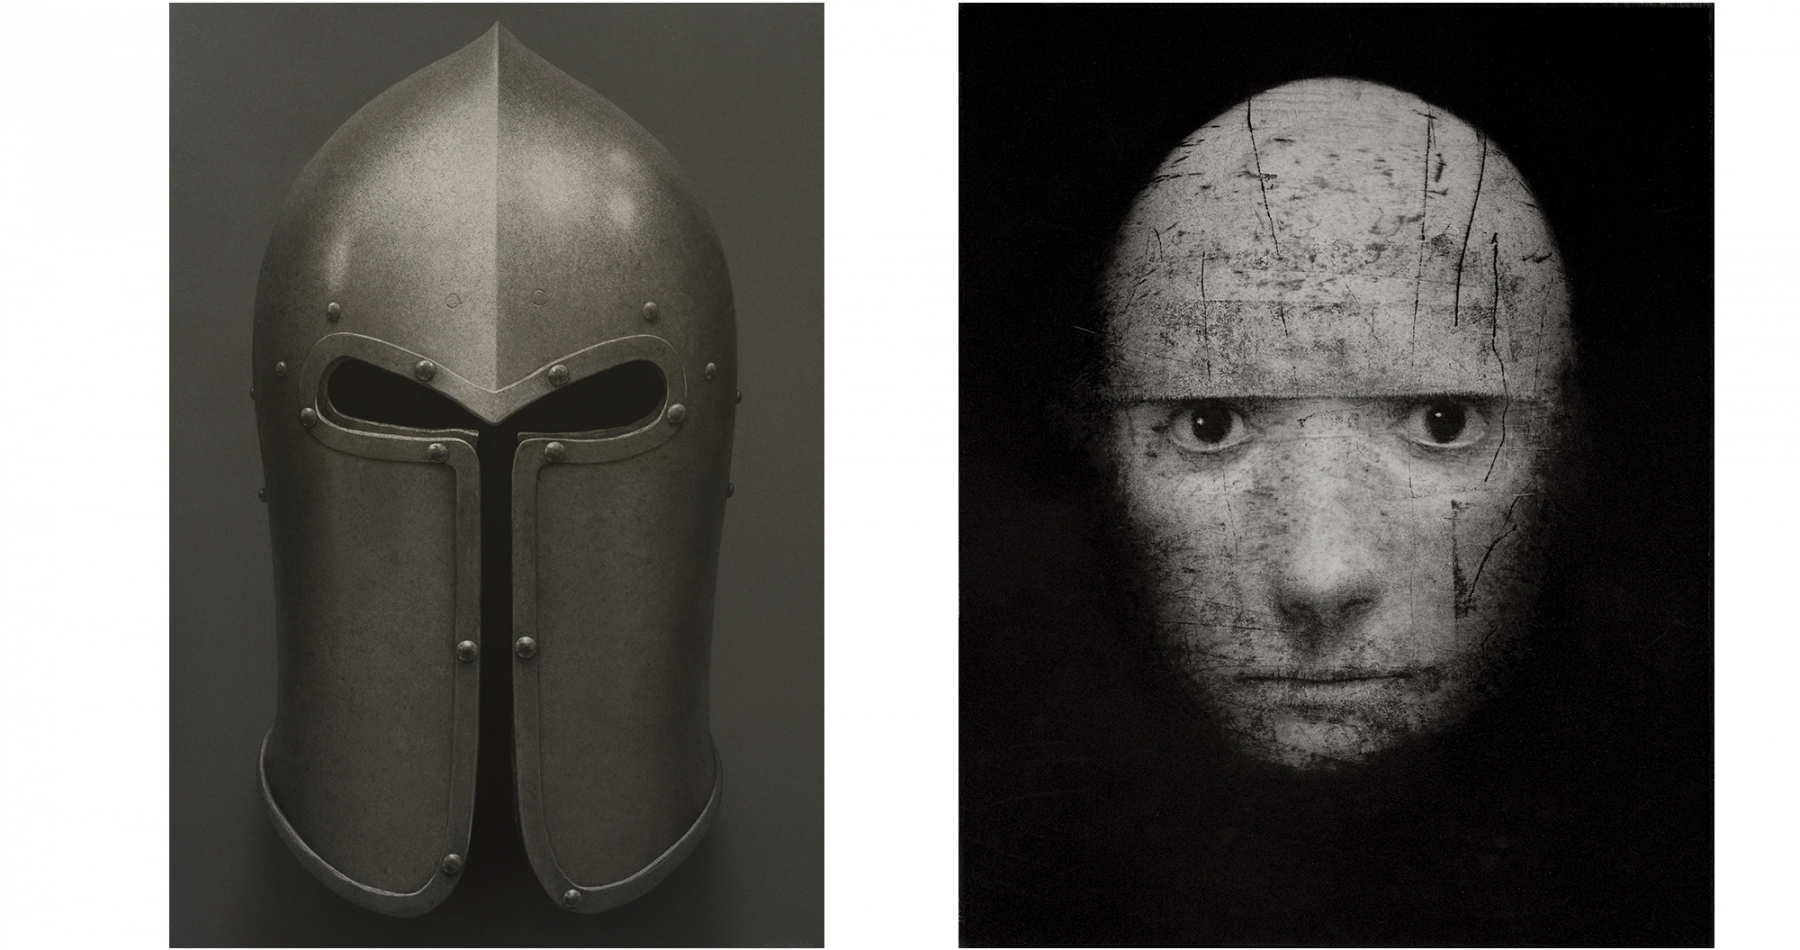 &nbsp;

Images from left:

Helmet V, 2019, acrylic on canvas, 72&nbsp;x 50&nbsp;inches

Yo Lo Vi (to Goya), 2019, monotype with watercolor and black pencil, 14 x 11 inches